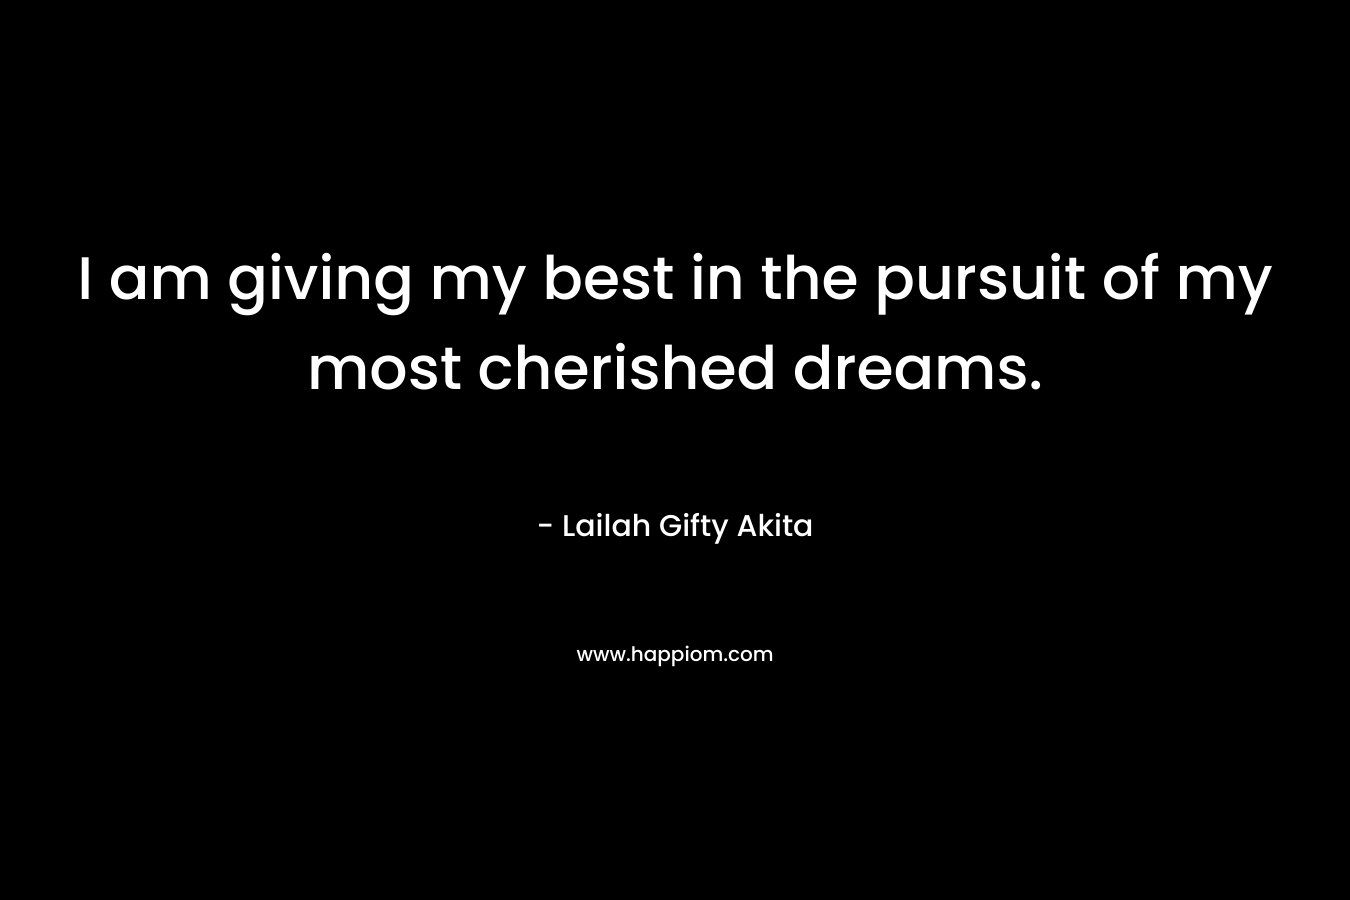 I am giving my best in the pursuit of my most cherished dreams.